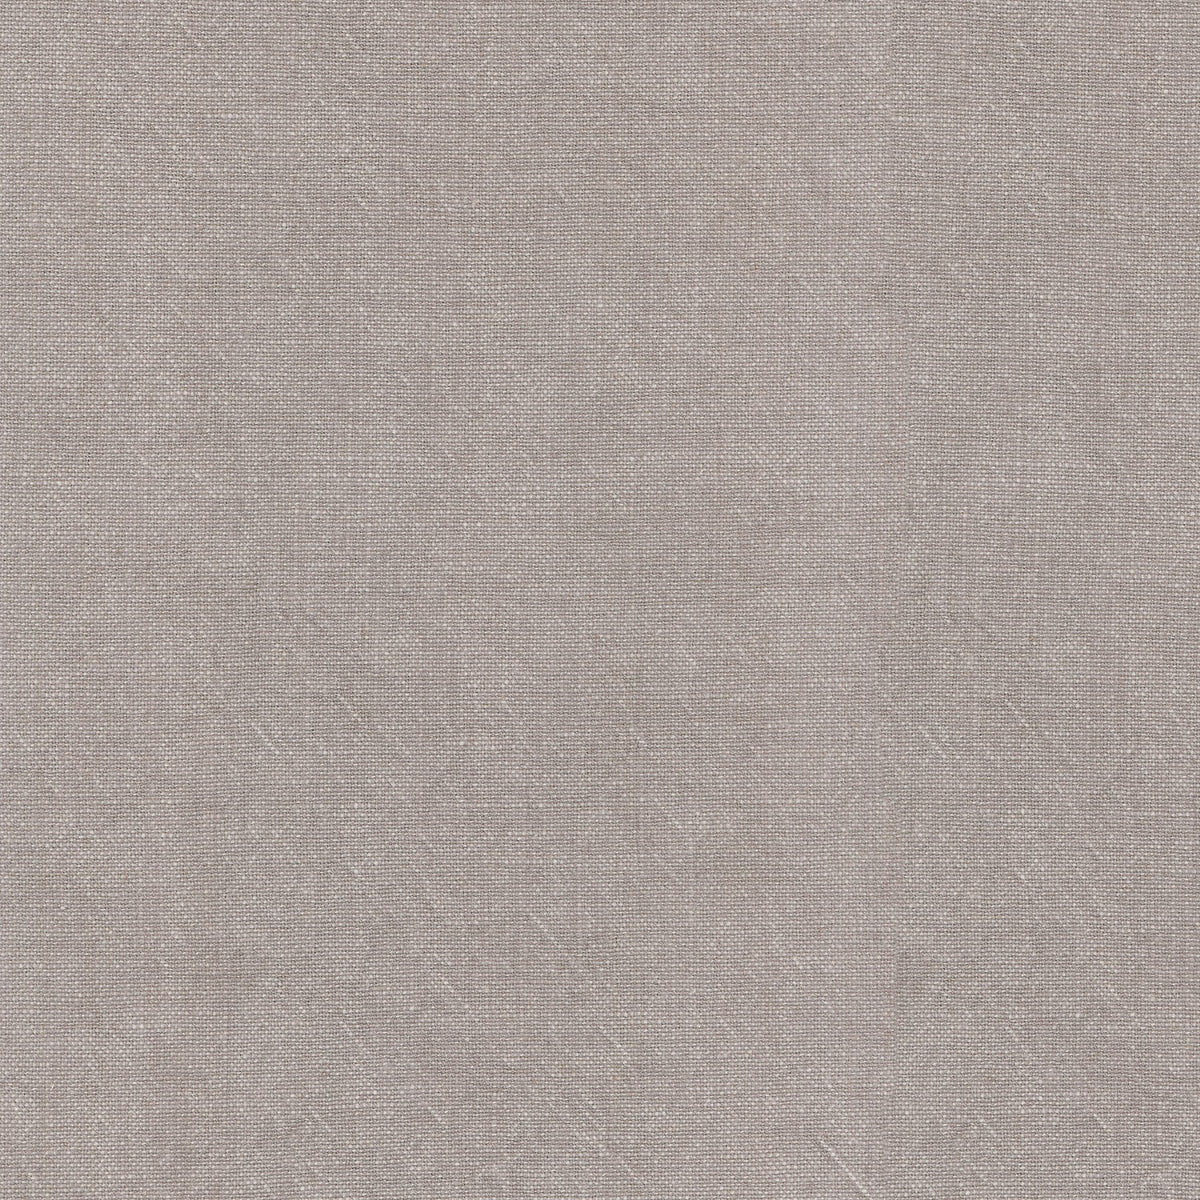 Ellen Degeneres - Cleary Pewter 250443 Solid Fabric Swatch